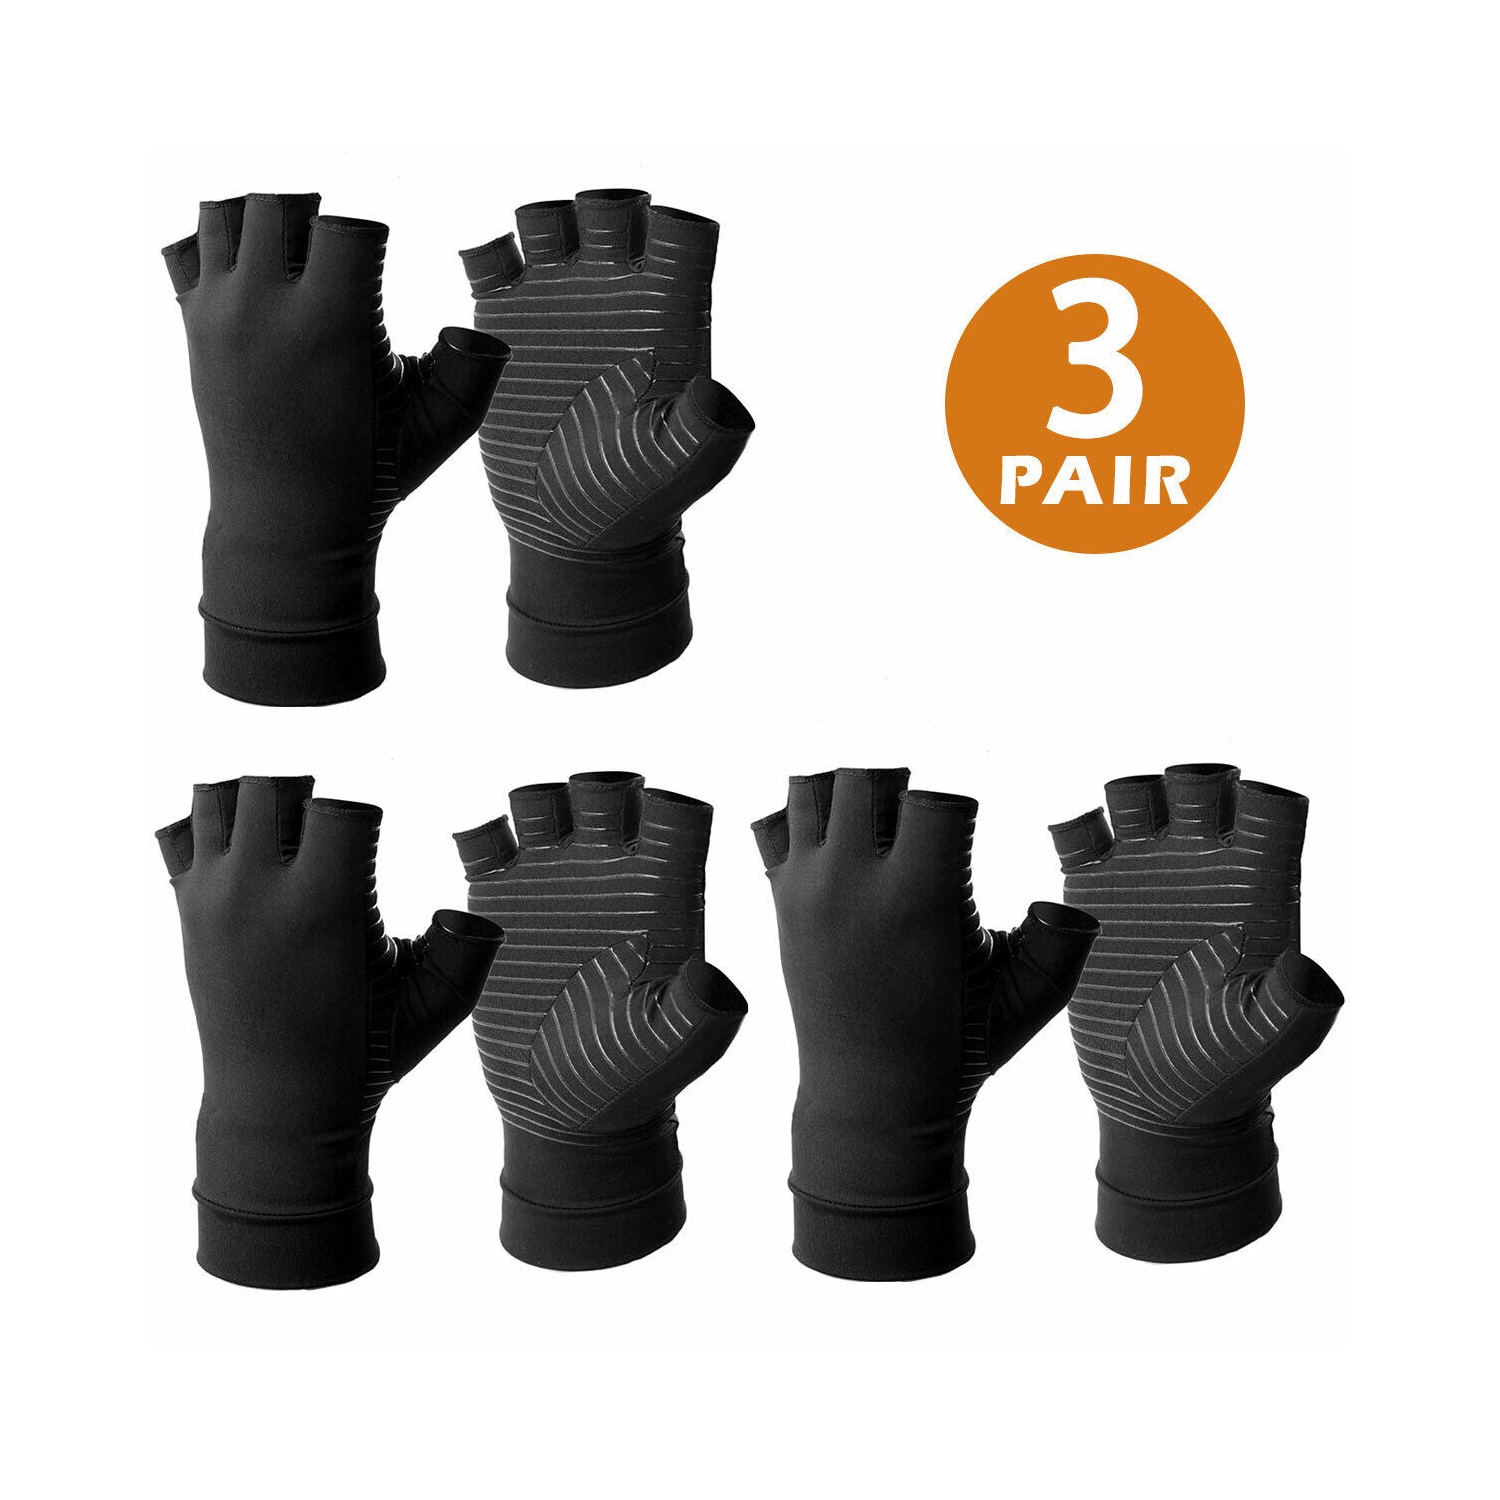 3 Pairs Copper-Infused Compression Gloves – Deals Club Canada